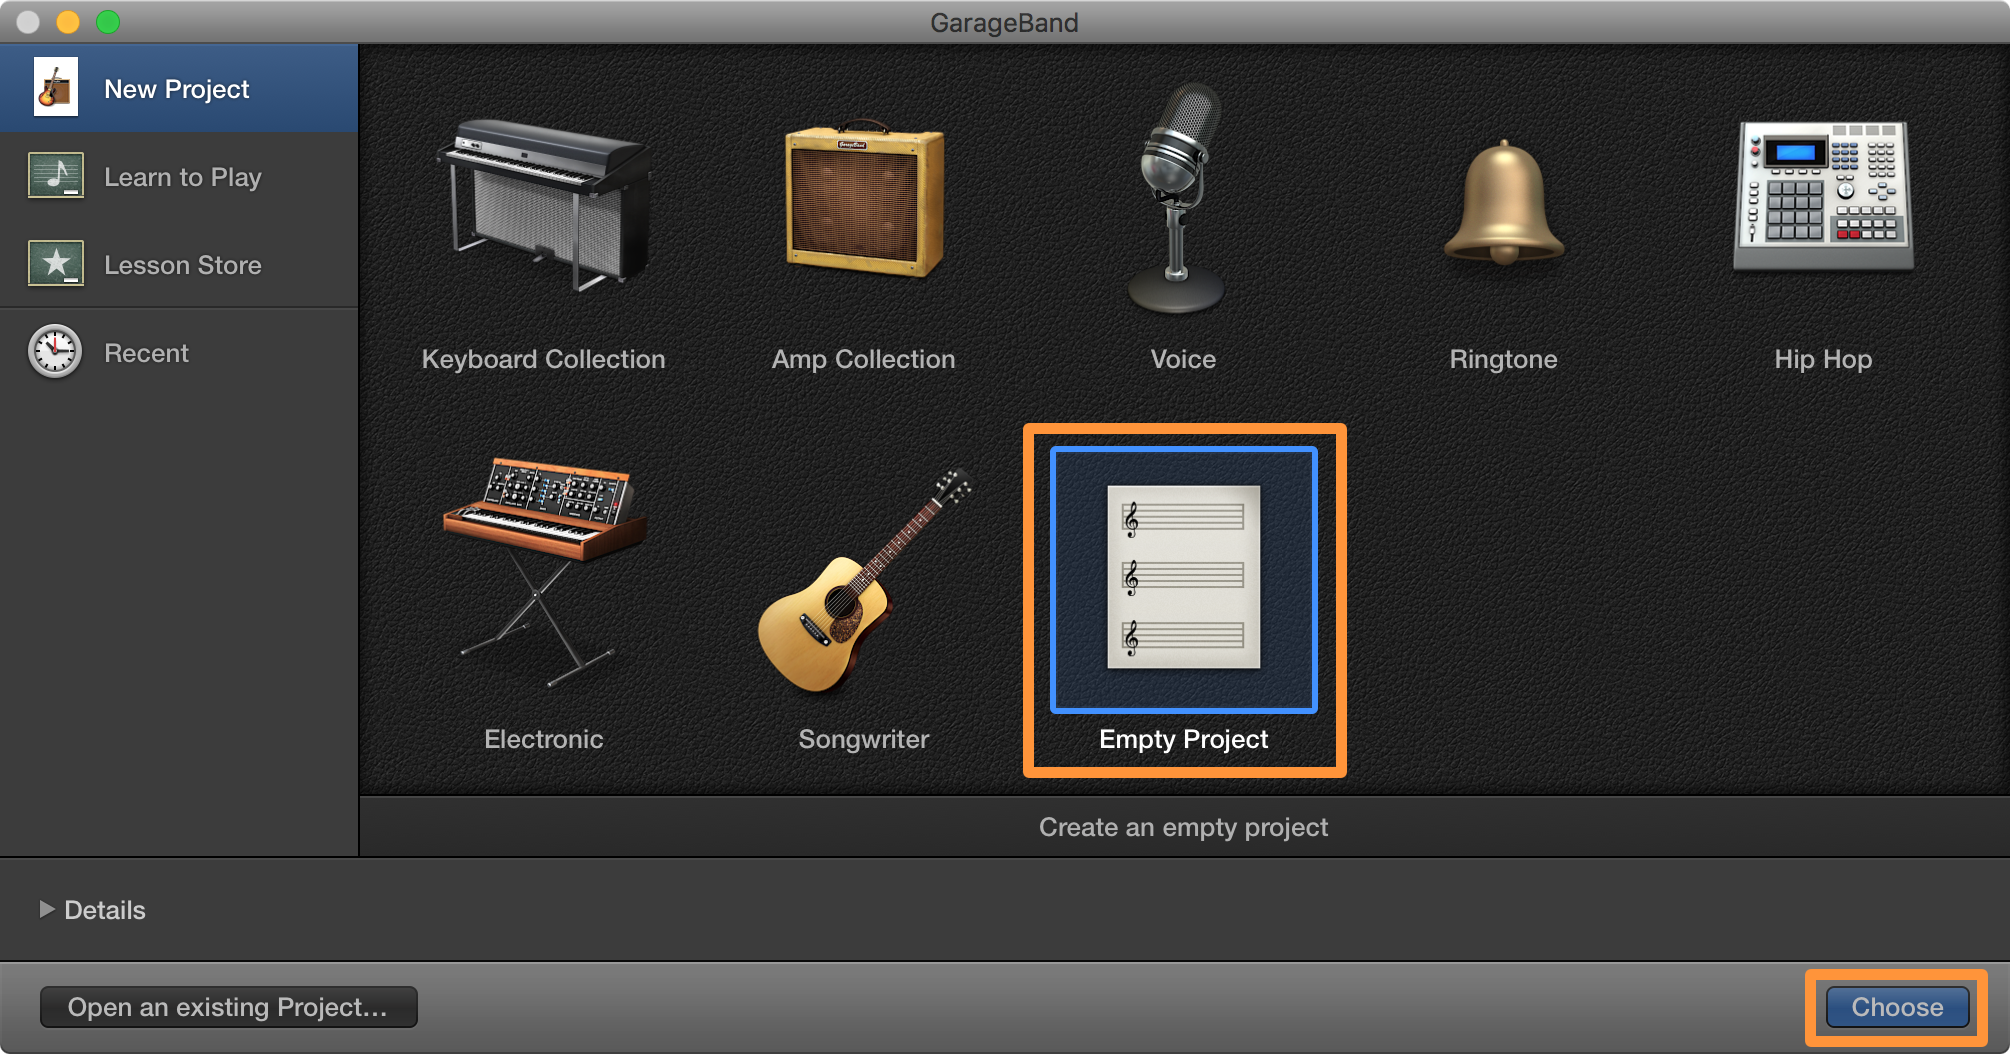 Can ios garageband projects be opened on a mac computer